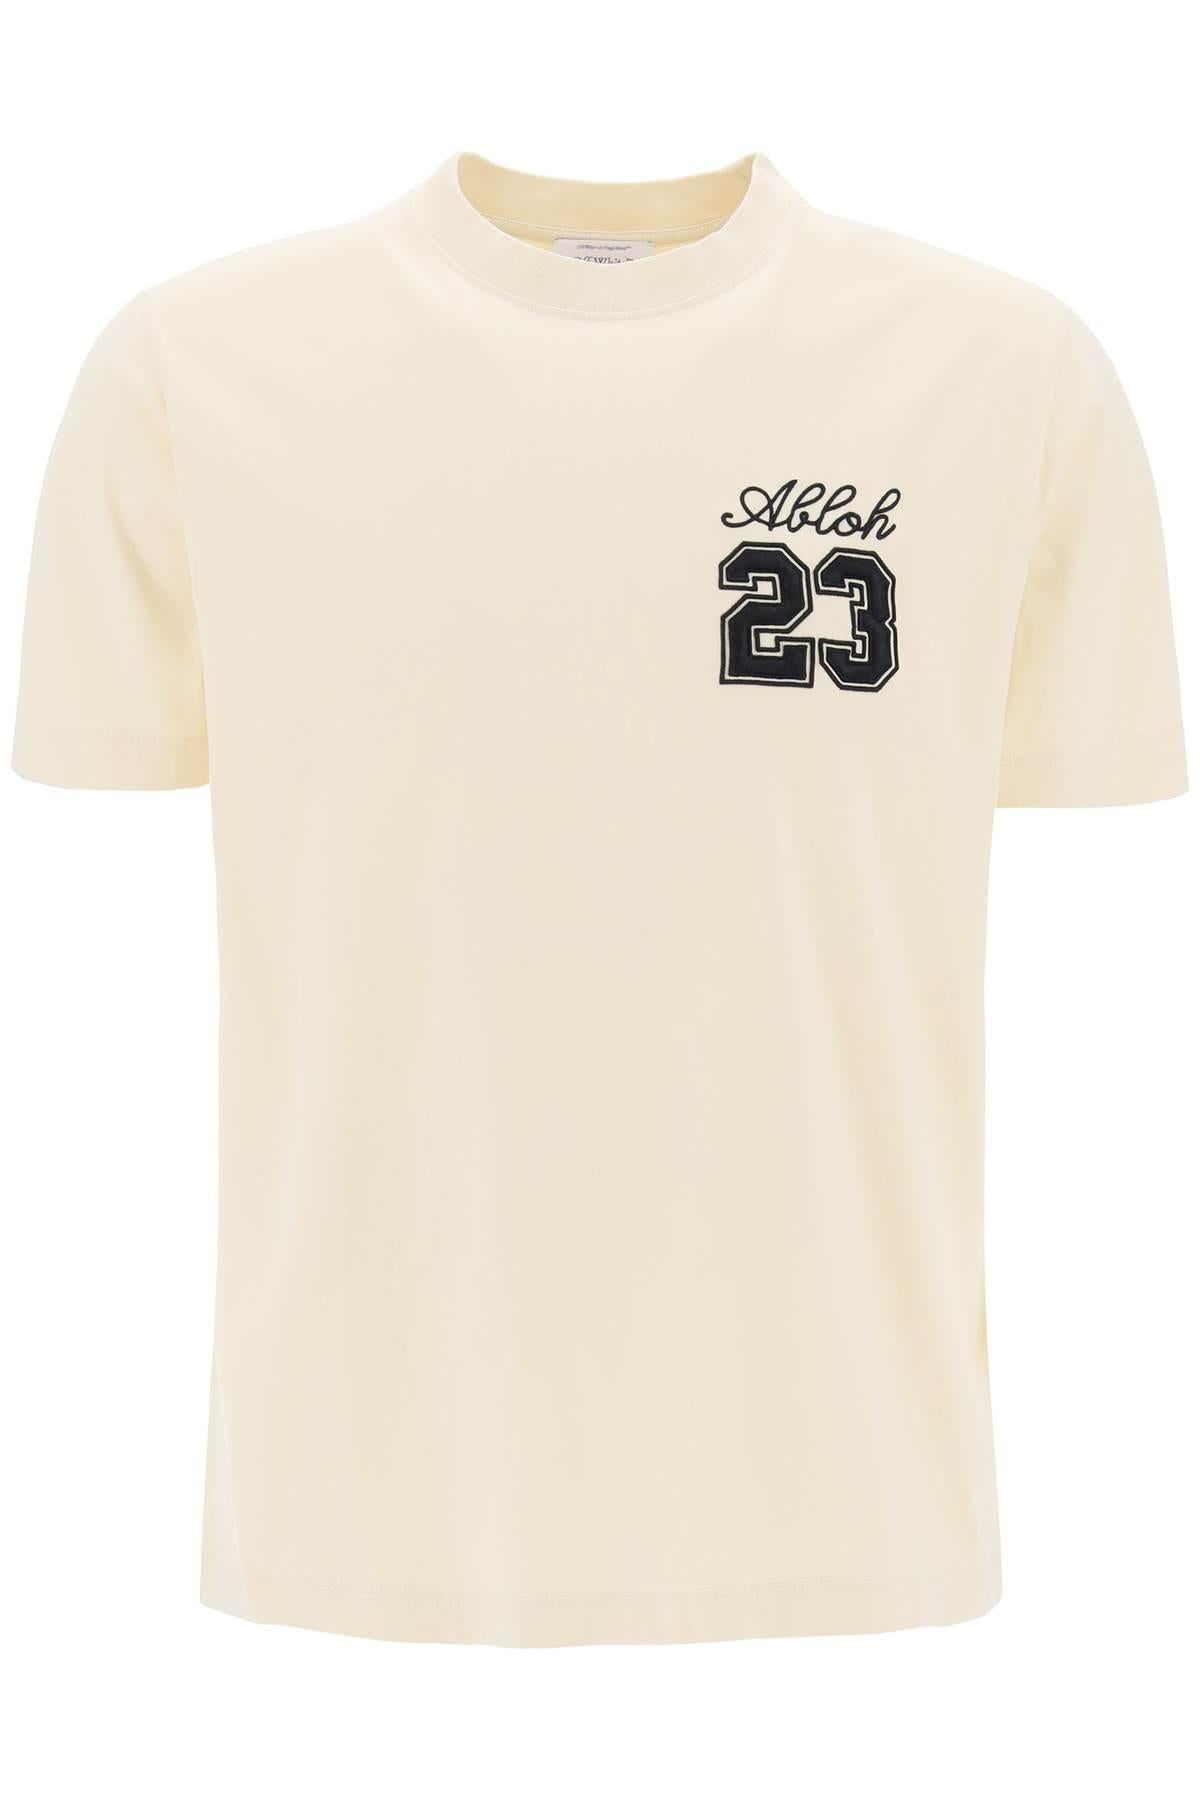 CREW-NECK T-SHIRT WITH 23 LOGO - 1